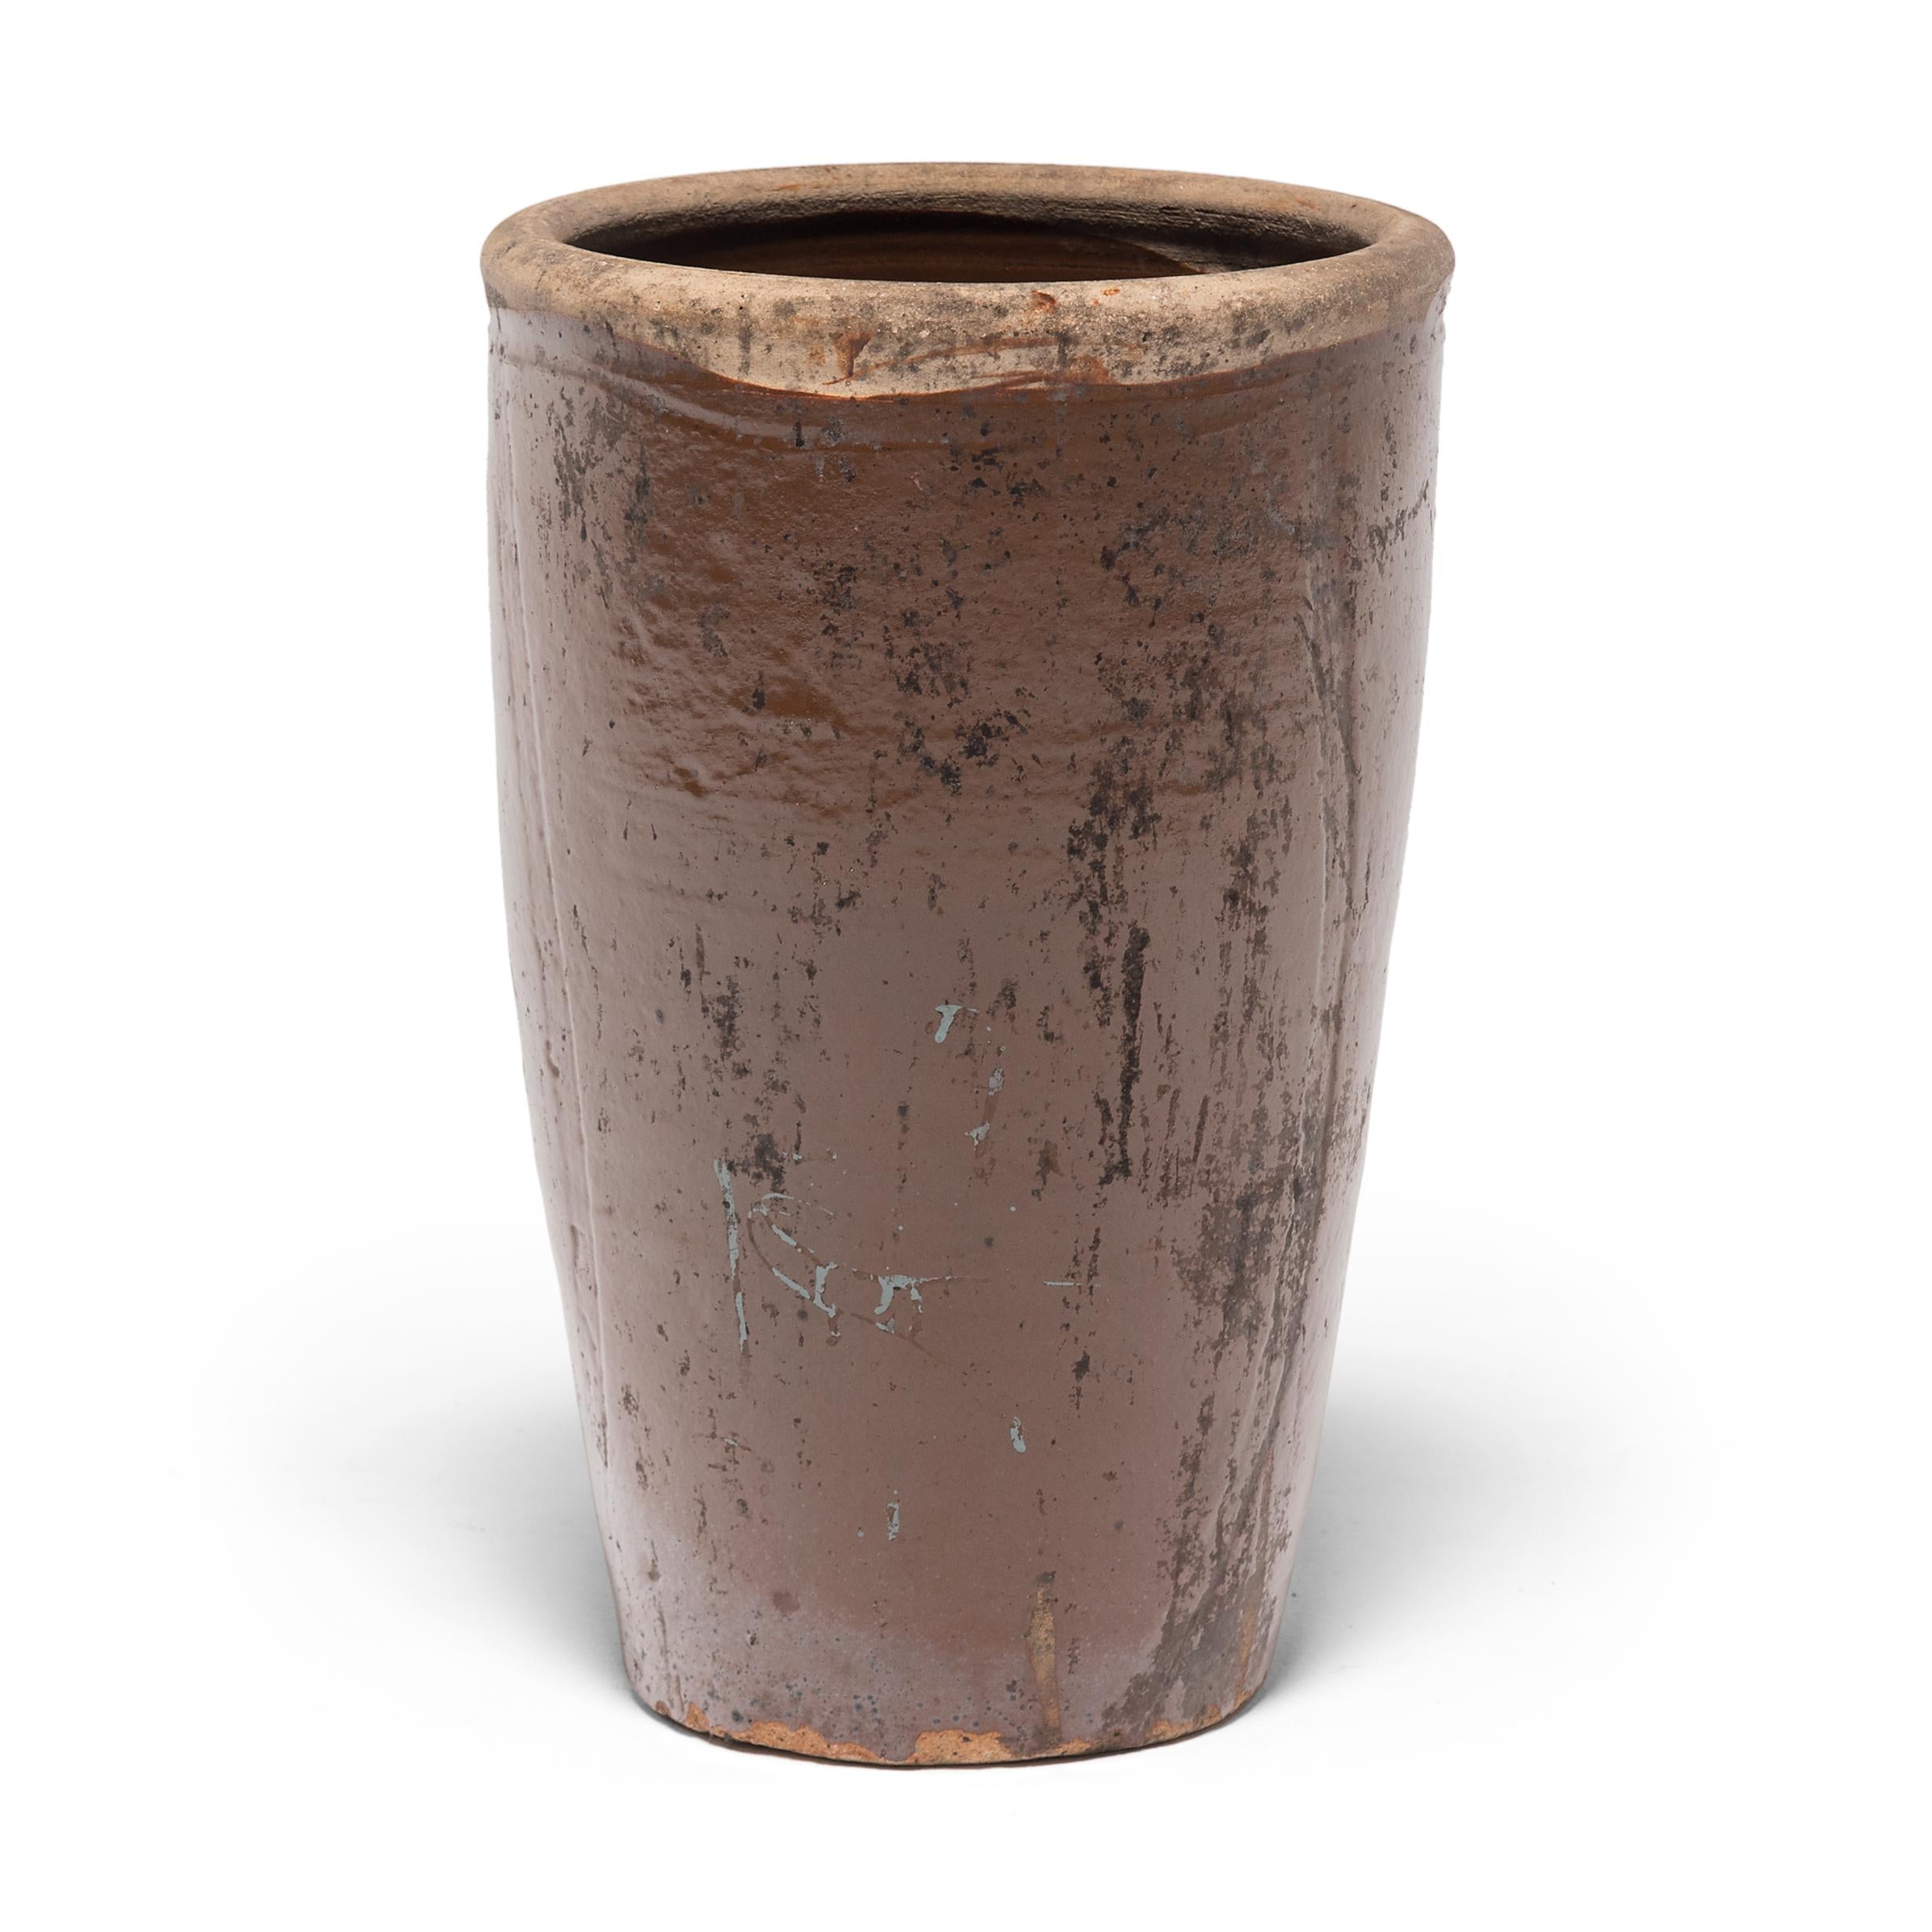 Coated inside and out with a warm light brown glaze, this monumental ceramic vessel would have been used in a Provincial kitchen to store pickled foods or keep a supply of water at arm's reach. Featuring an unglazed rim and speckled with